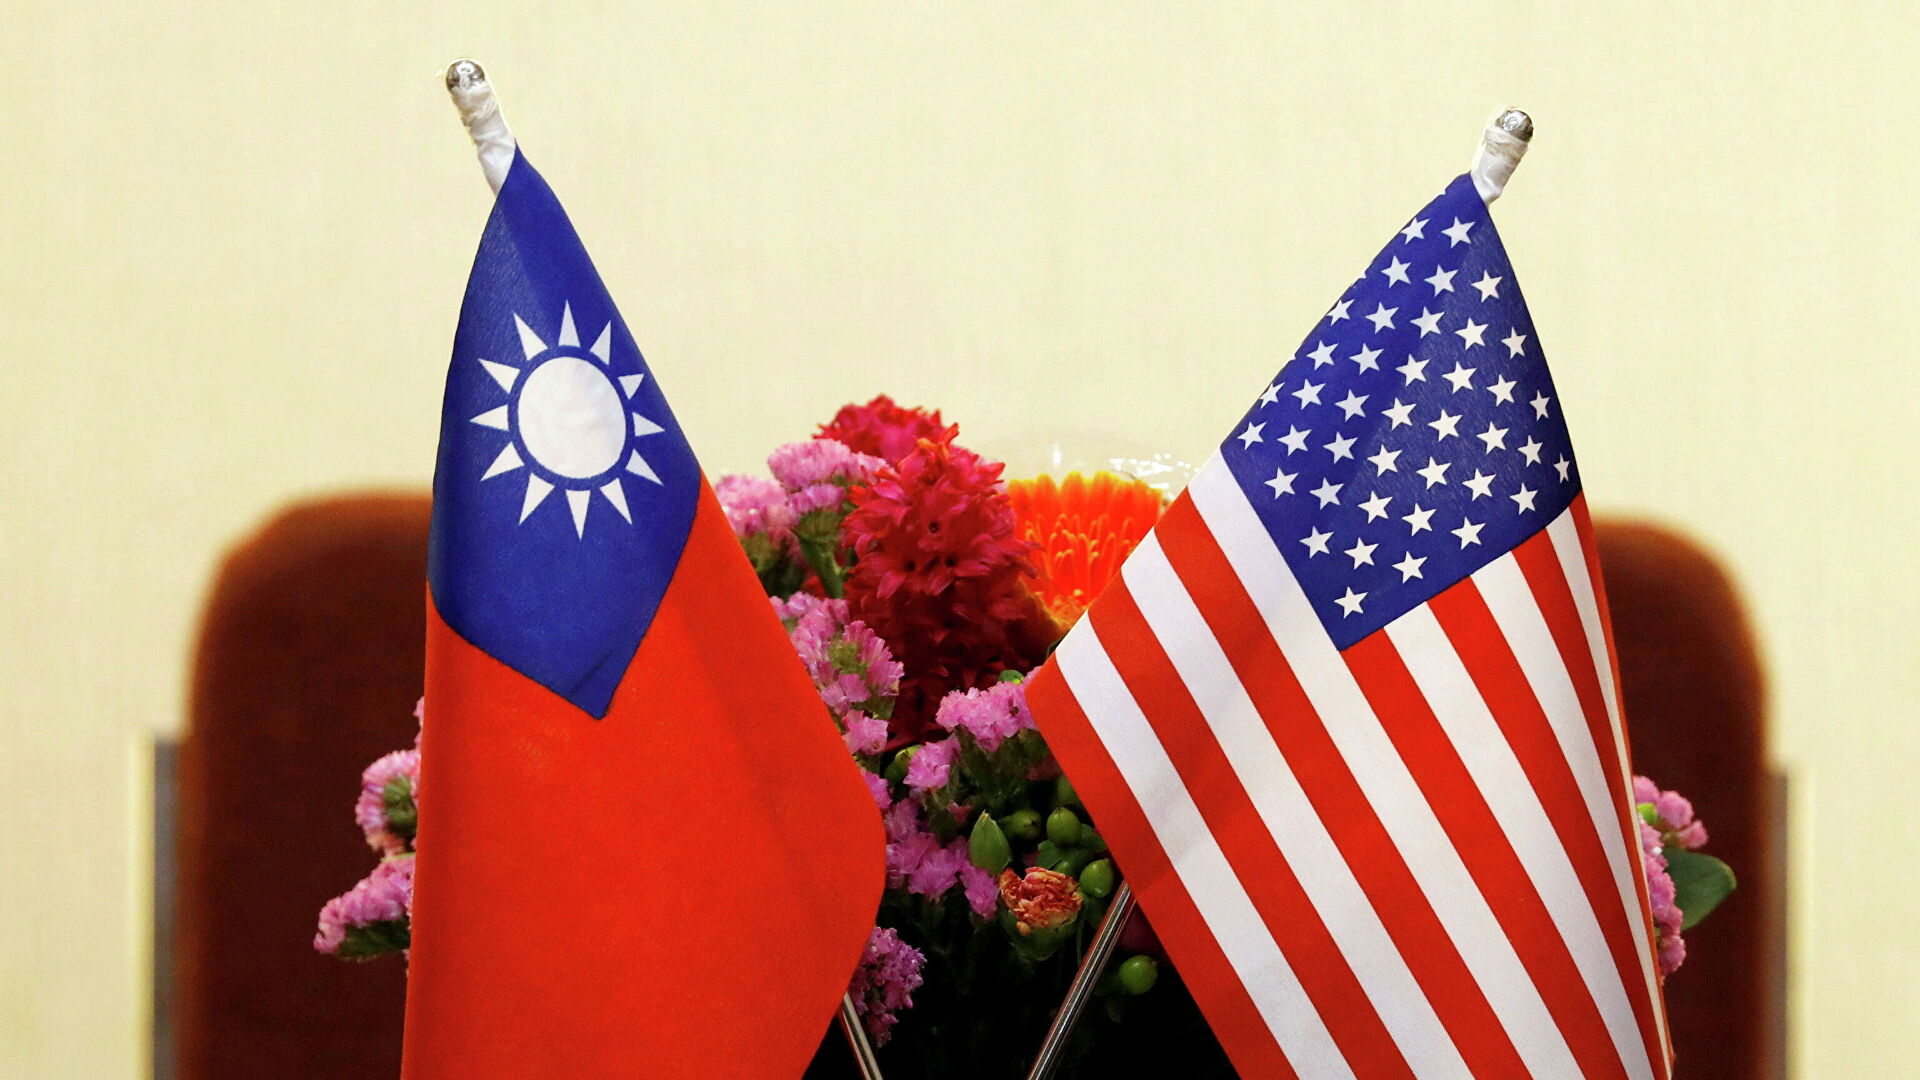 Congressional Think Tank Urges US To Take Robust Actions On Taiwan Amid Tensions With China